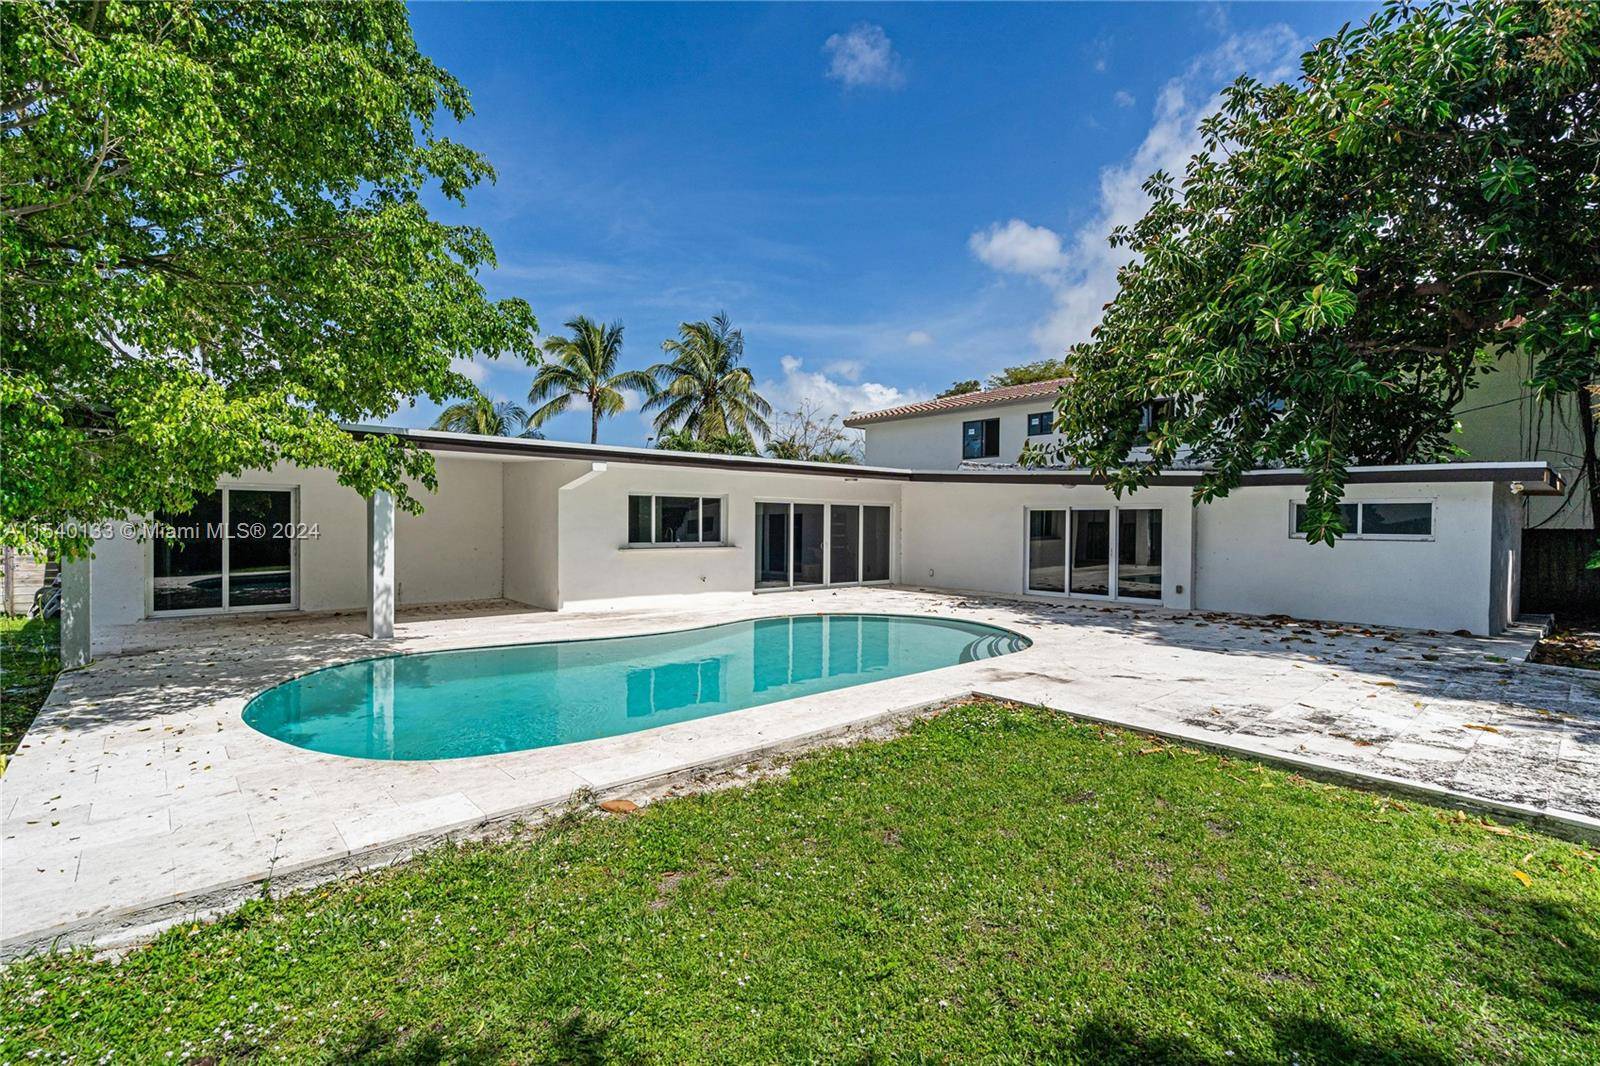 Modern spacious and renovated pool home with 4 bedrooms 2 baths family room located in Skylake near by Aventura.